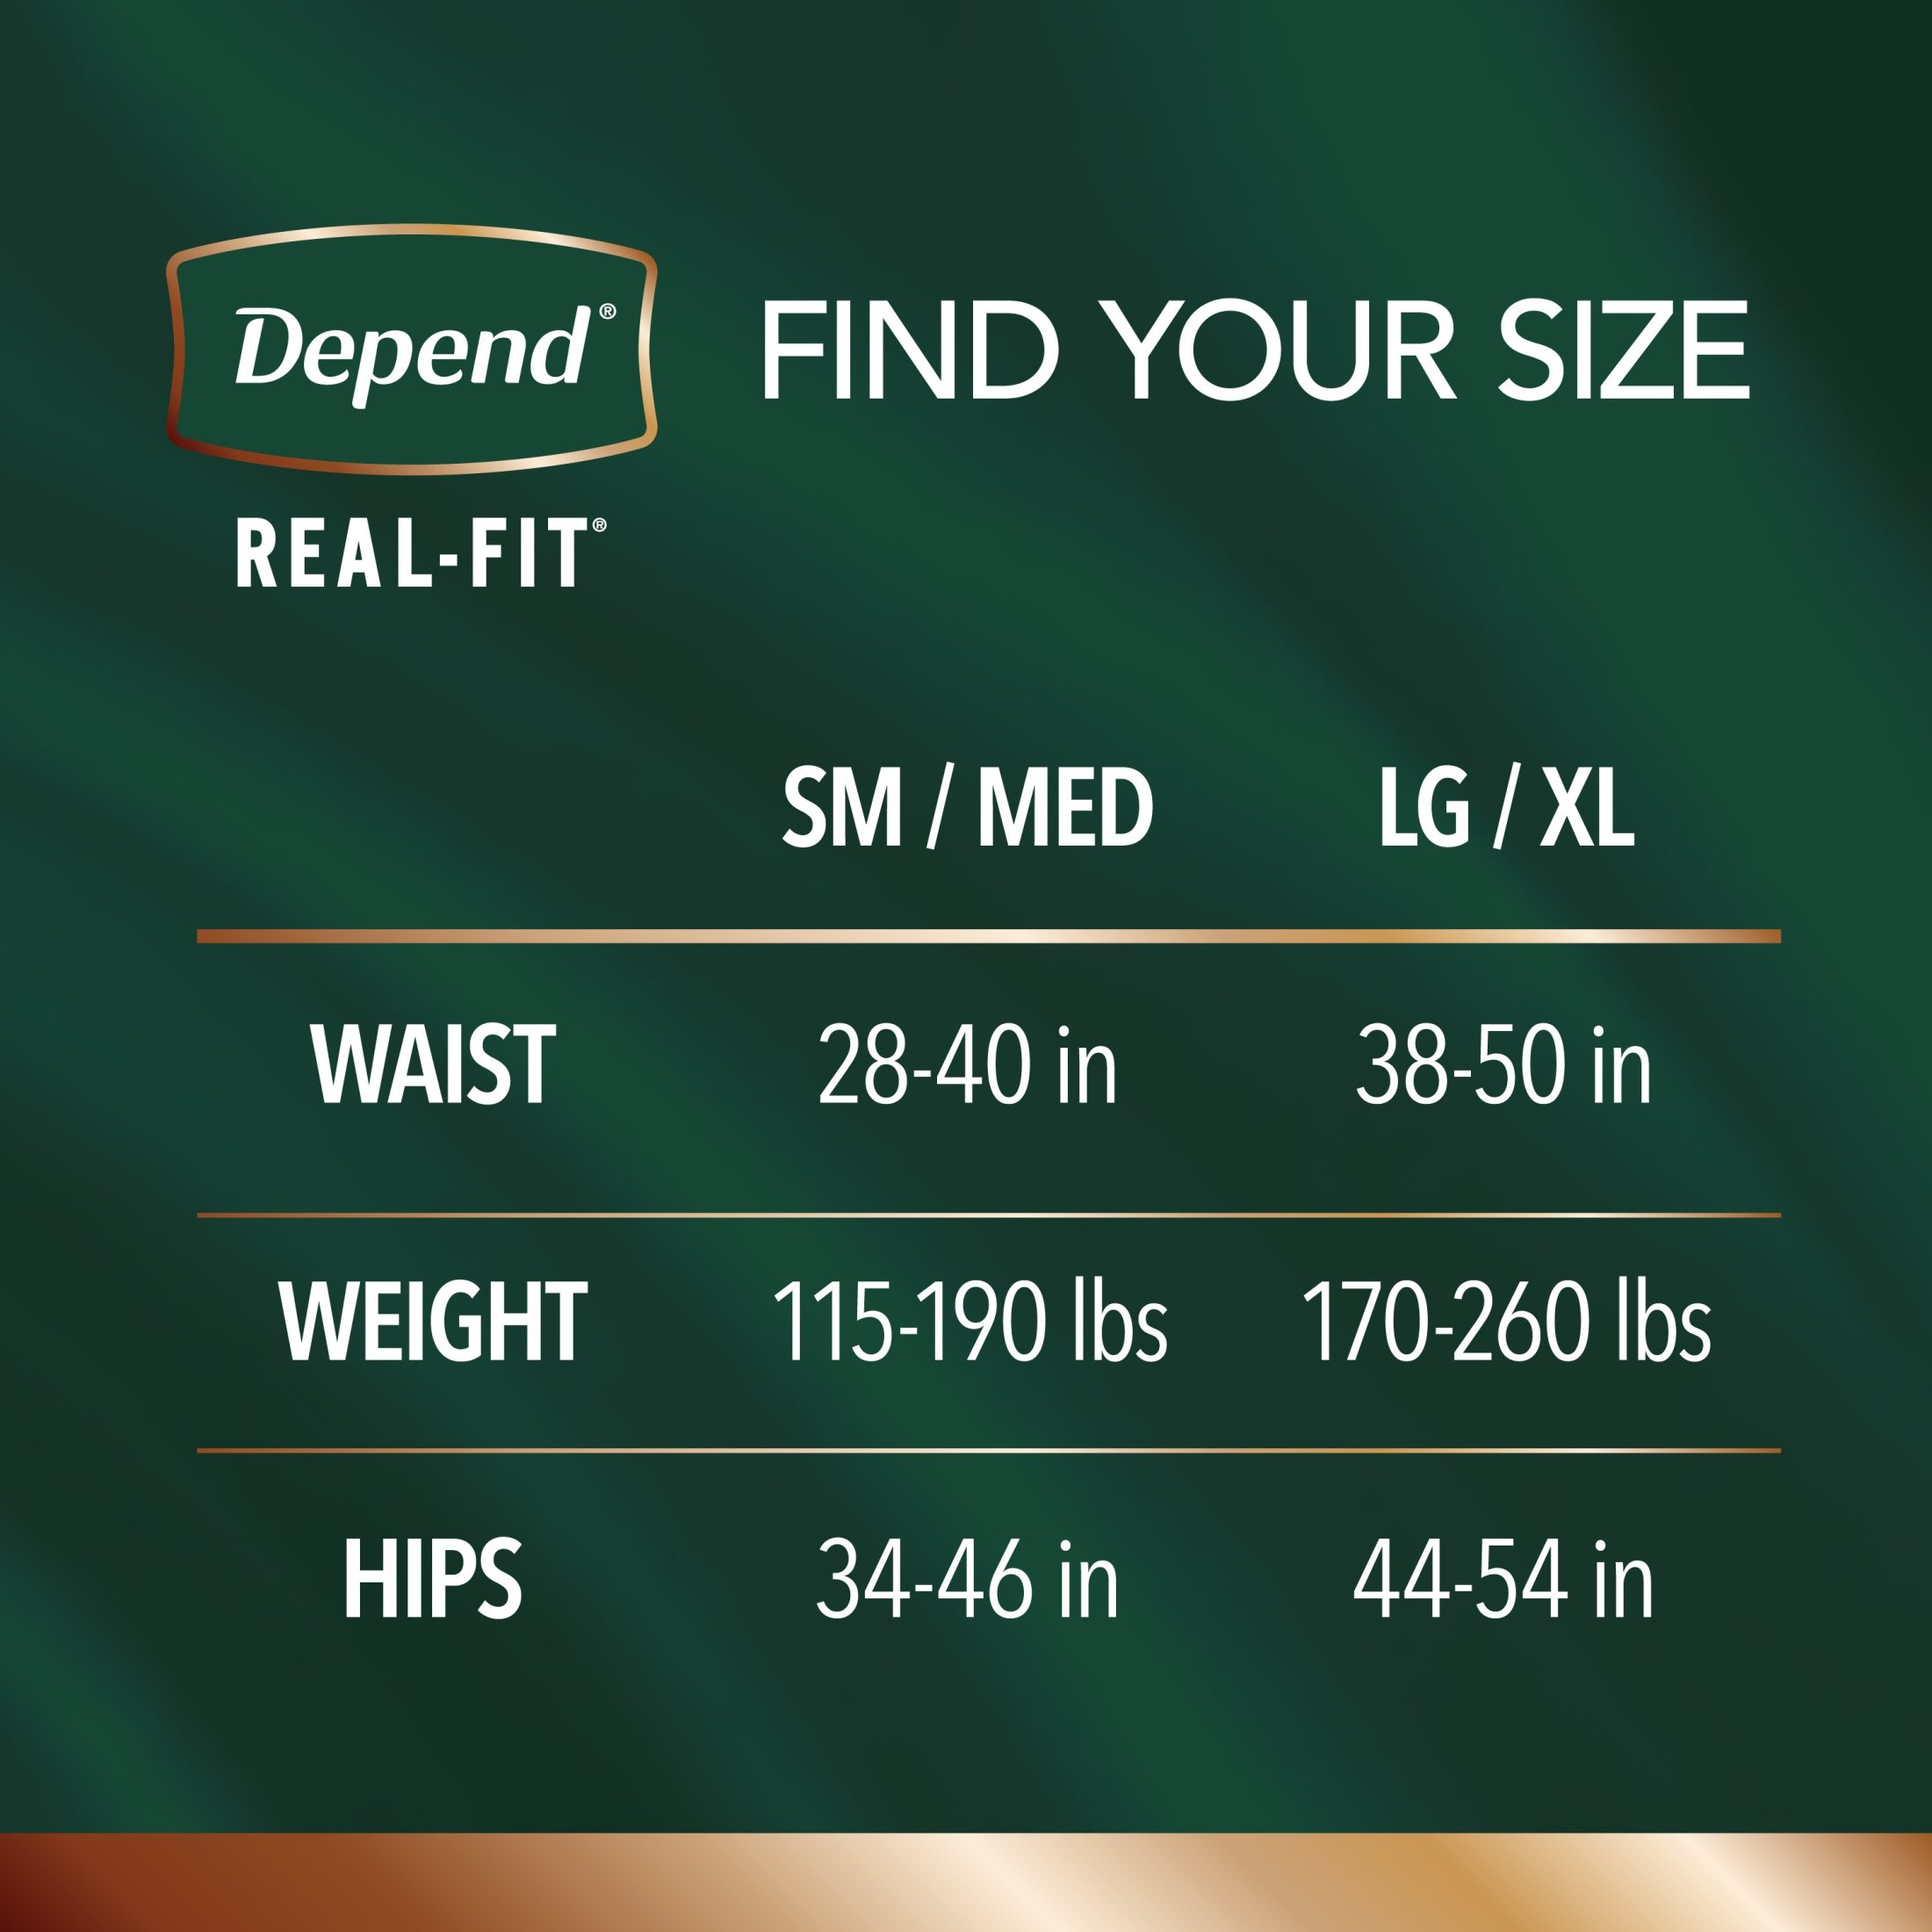 Depend Real Fit Men's Incontinence Underwear, Maximum Absorbency, S/M, Black, 56 Count - image 3 of 9